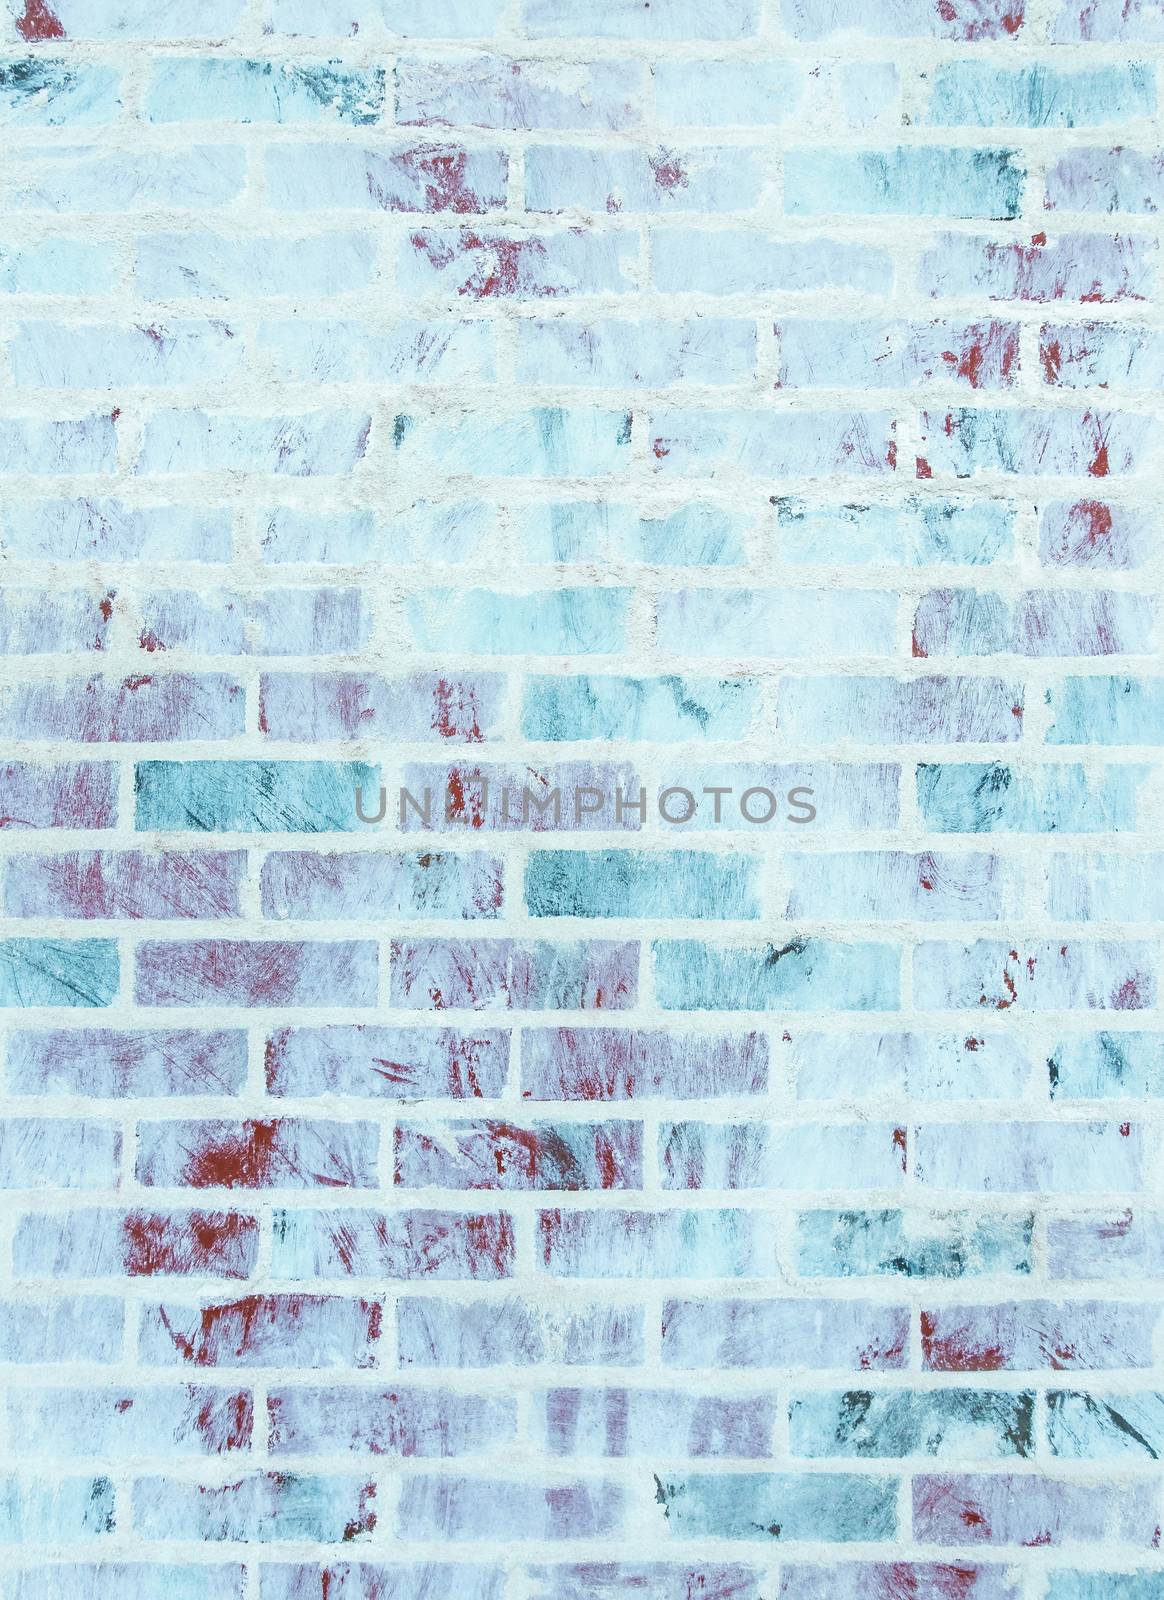 Whitewashed brick wall texture with blue and green hues